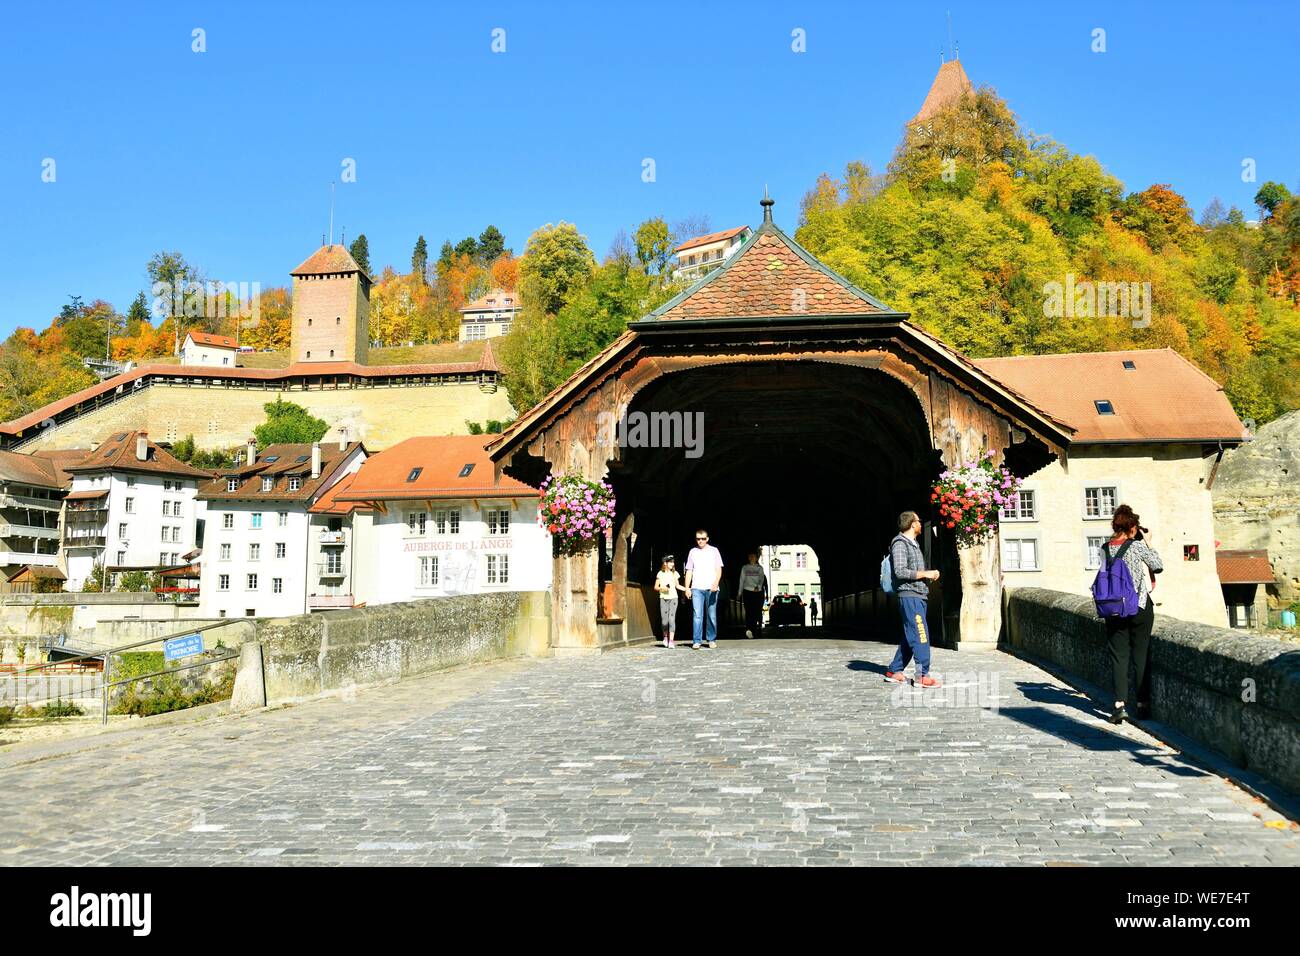 Switzerland, Canton of Fribourg, Fribourg, Sarine River (Saane River) banks, Bern wooden covered bridge Stock Photo